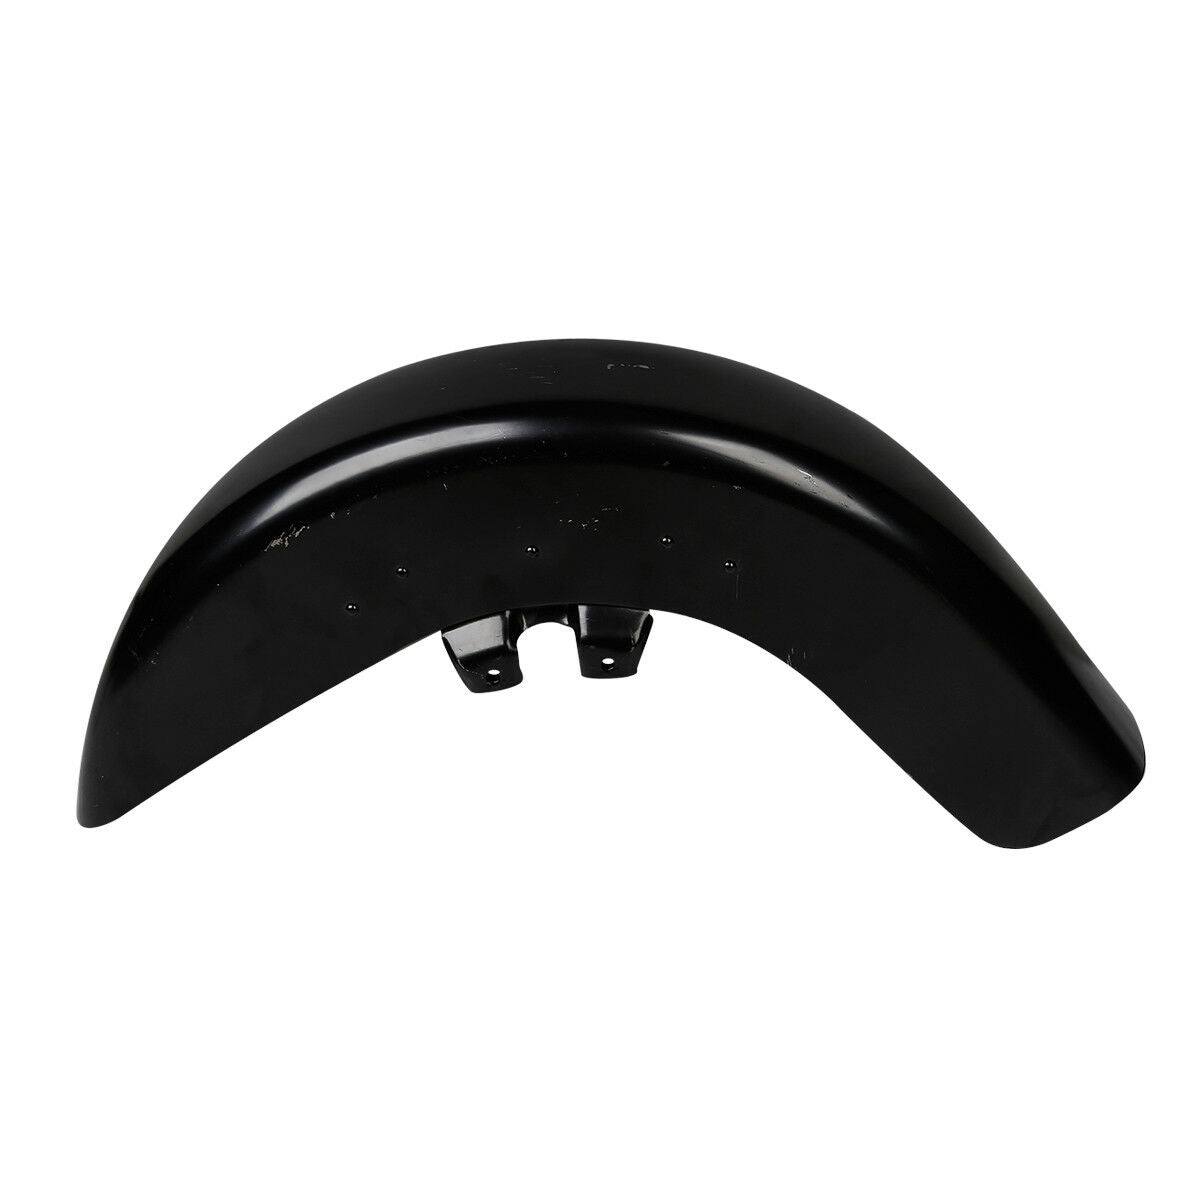 Unpainted Black Front Fender Fit For Harley Touring Street Road Glide 89-13 12 - Moto Life Products